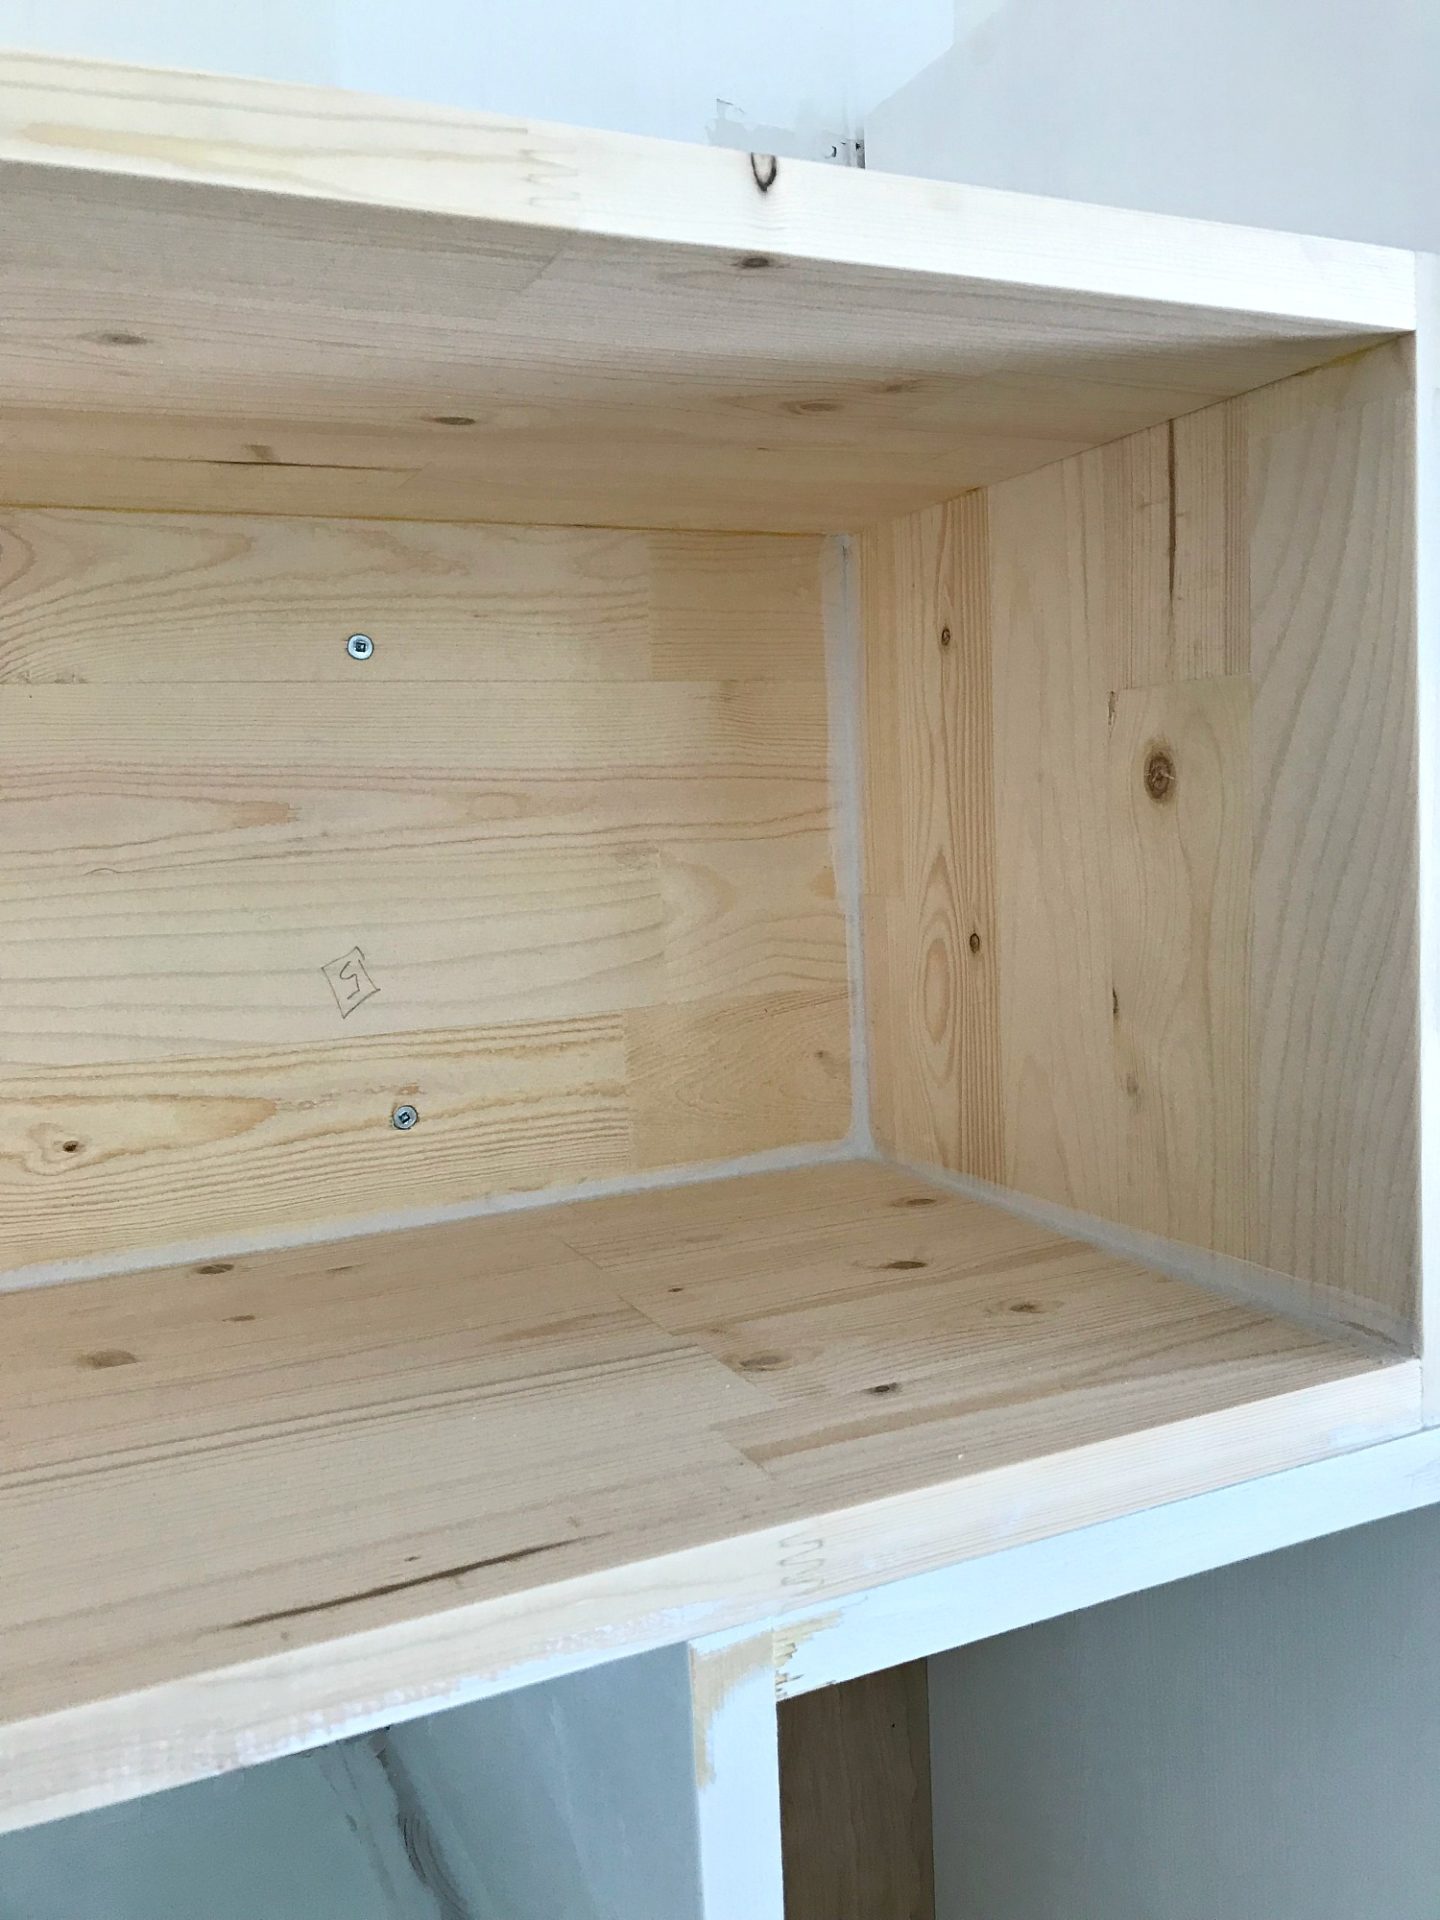 How to build storage cubbies in any custom size